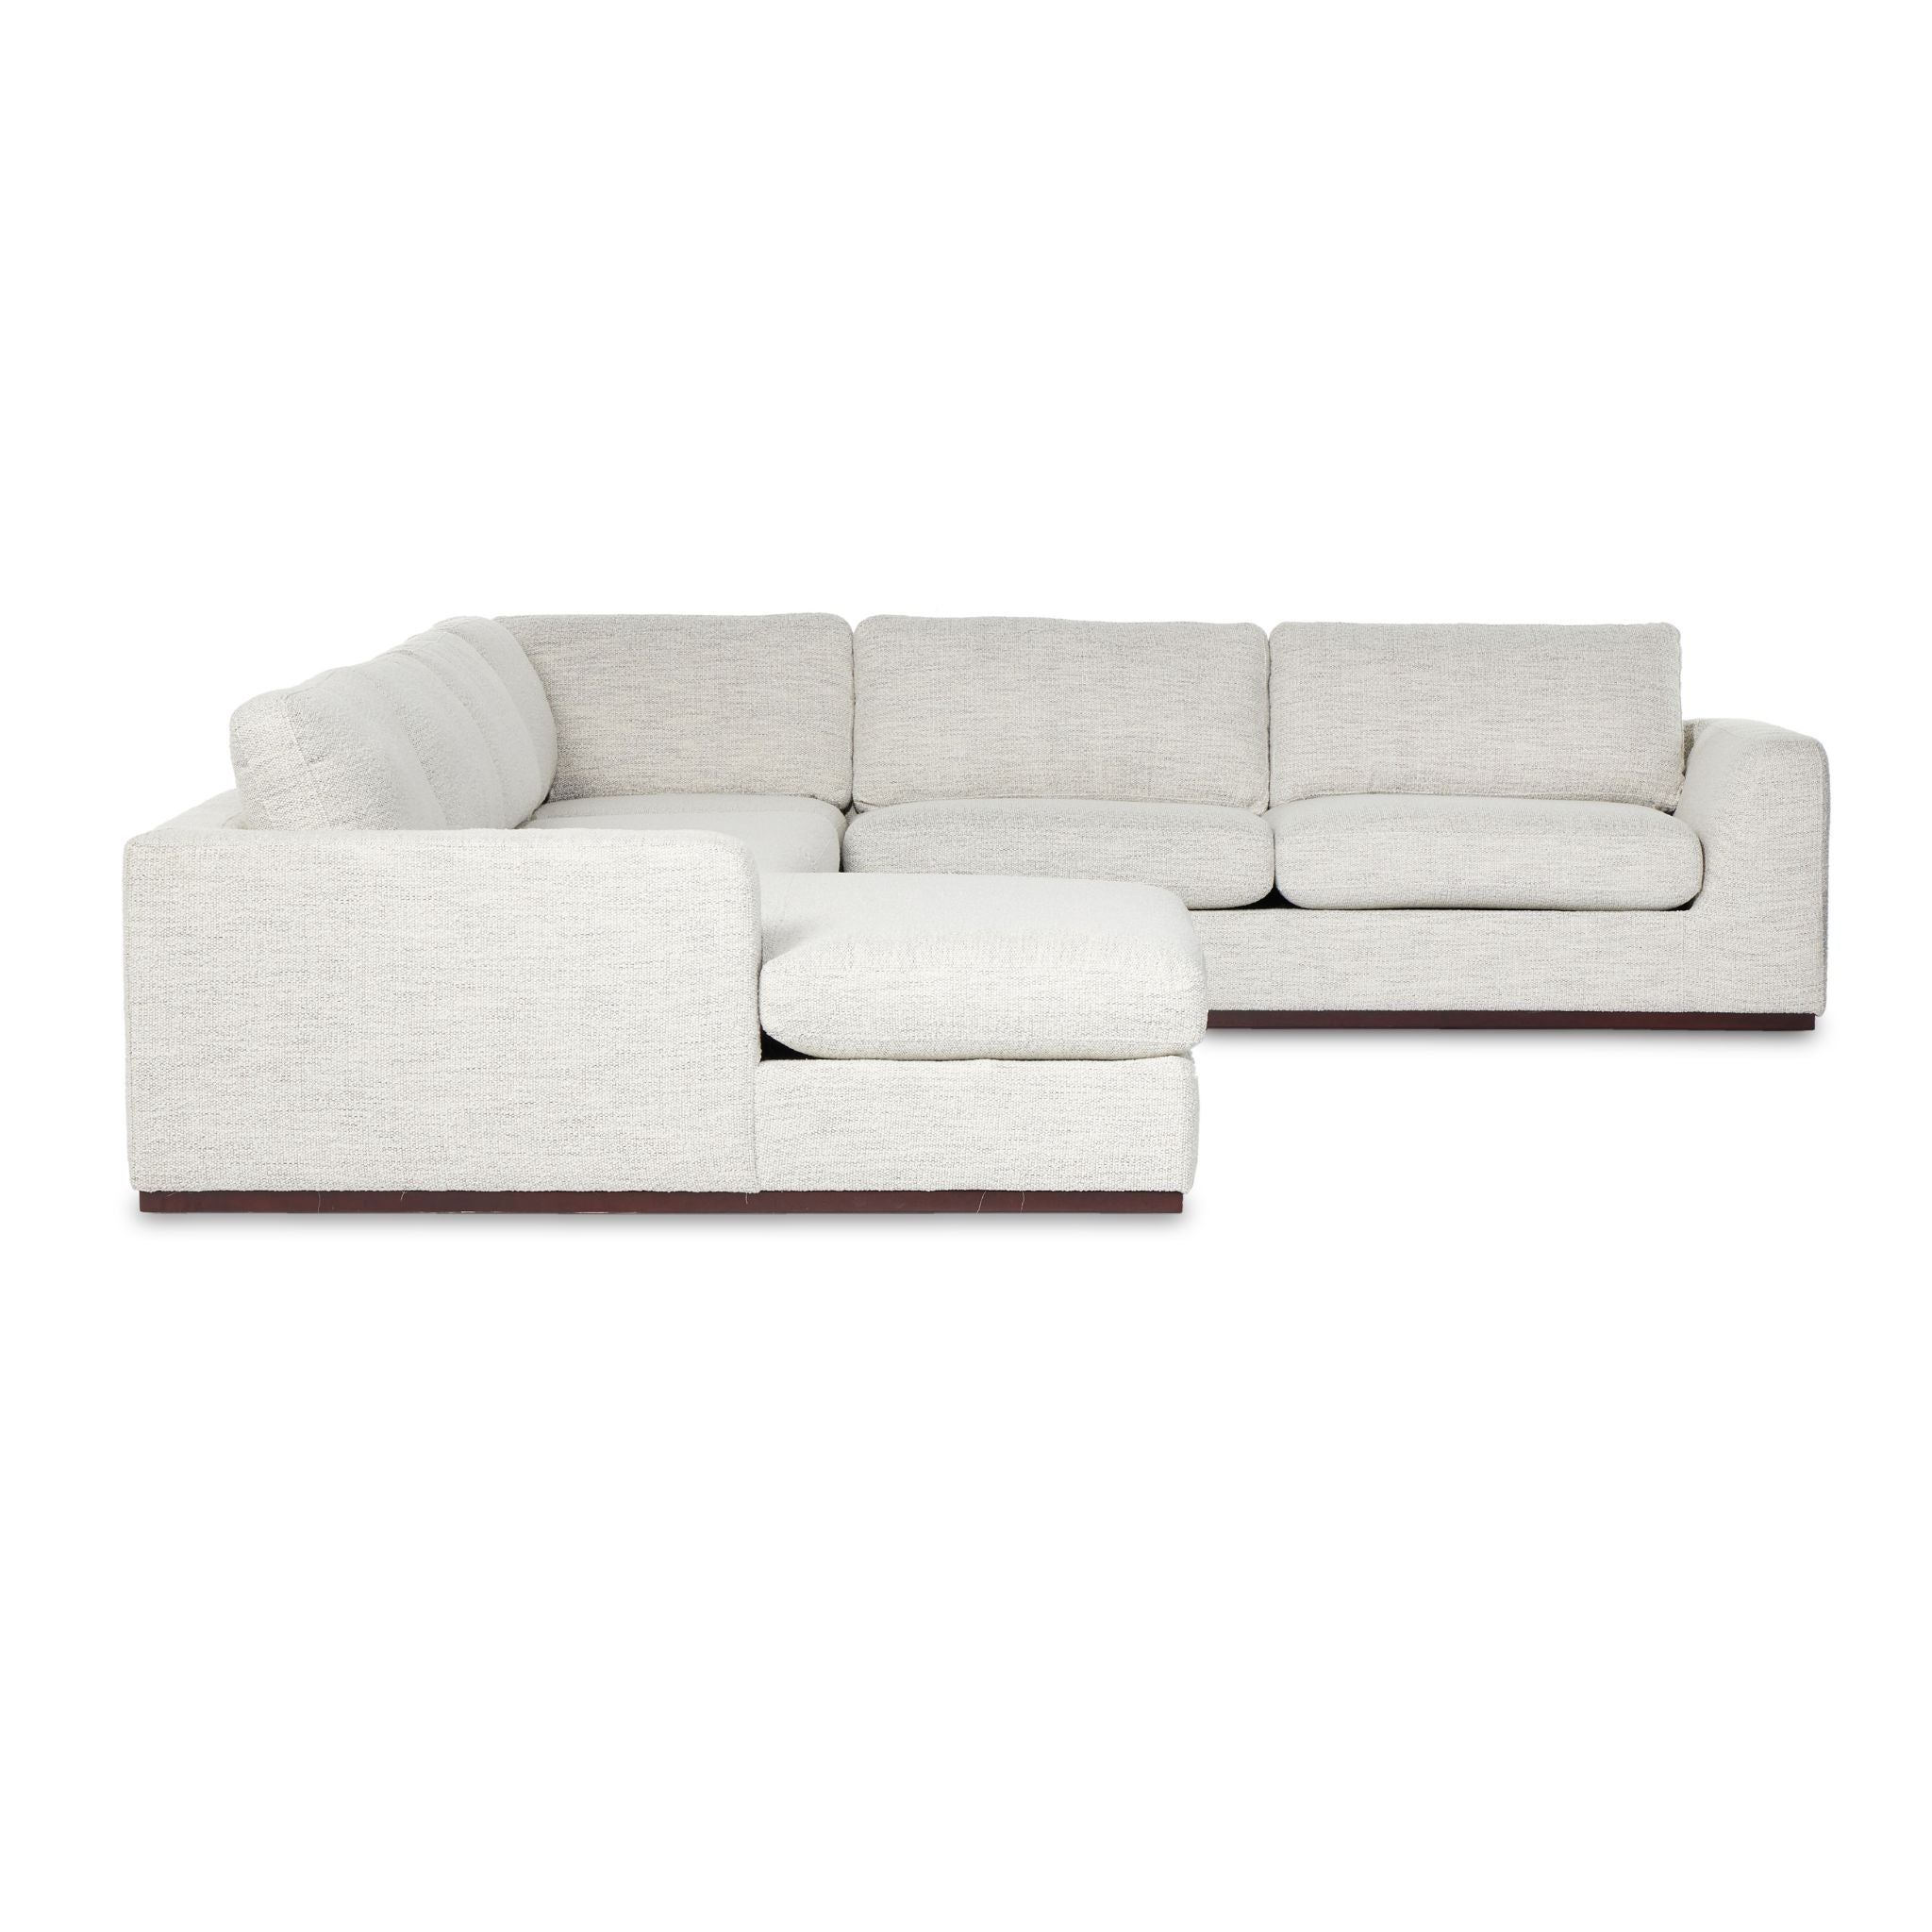 Simply Elevated - Elevate your space with our simply styled and incredibly comfortable four-piece sectional, designed for everyday lounging and relaxation.